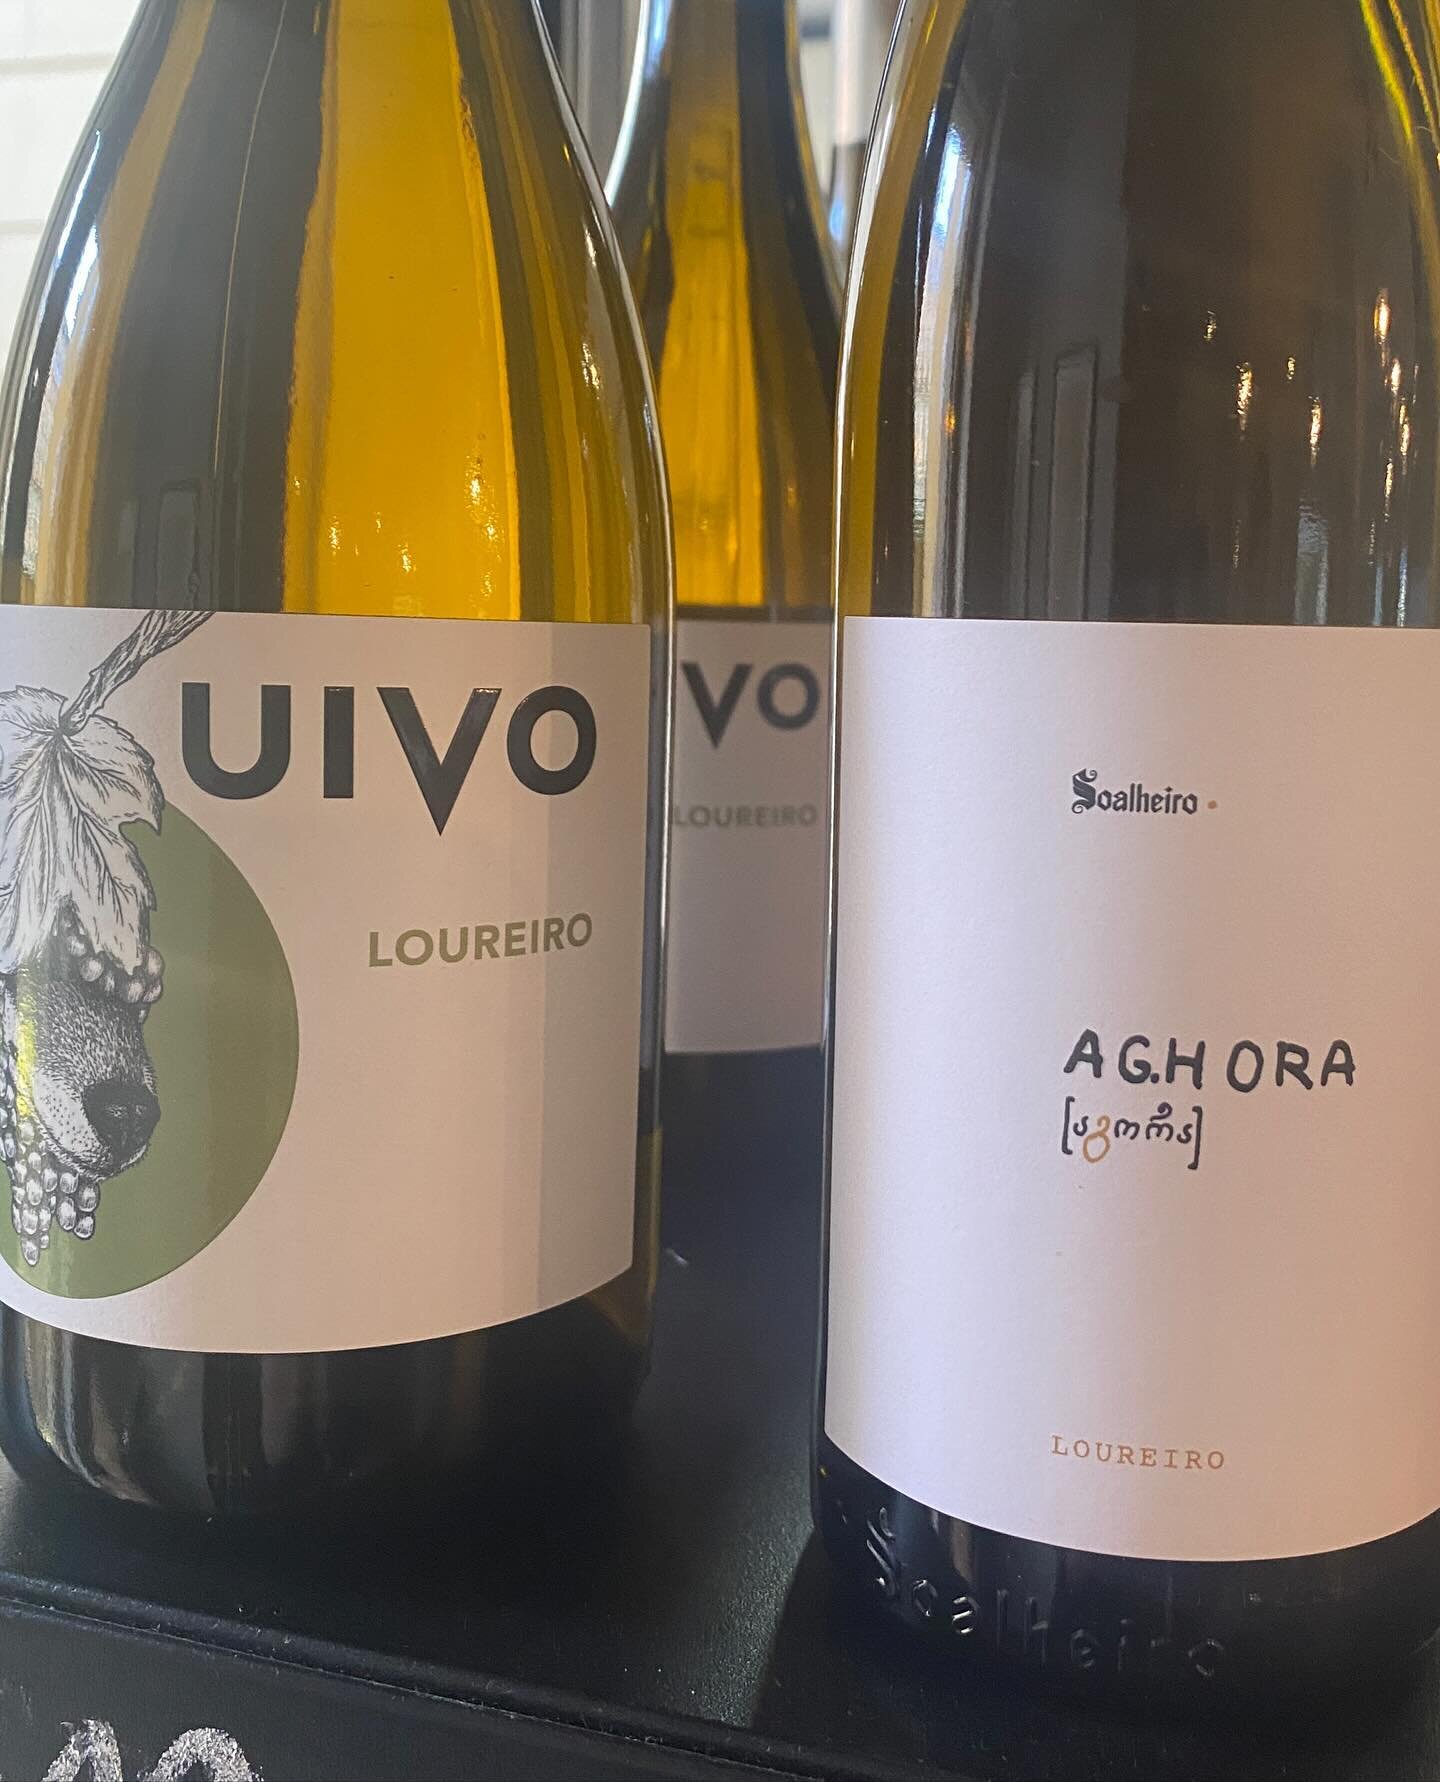 Portugal&rsquo;s natural wine scene 🎬 is blooming &hellip; great wine shop @cavebombarda !! 🙌 Cu soon doing a tasting in your cute wine bar. 🌳 🍷 🏠